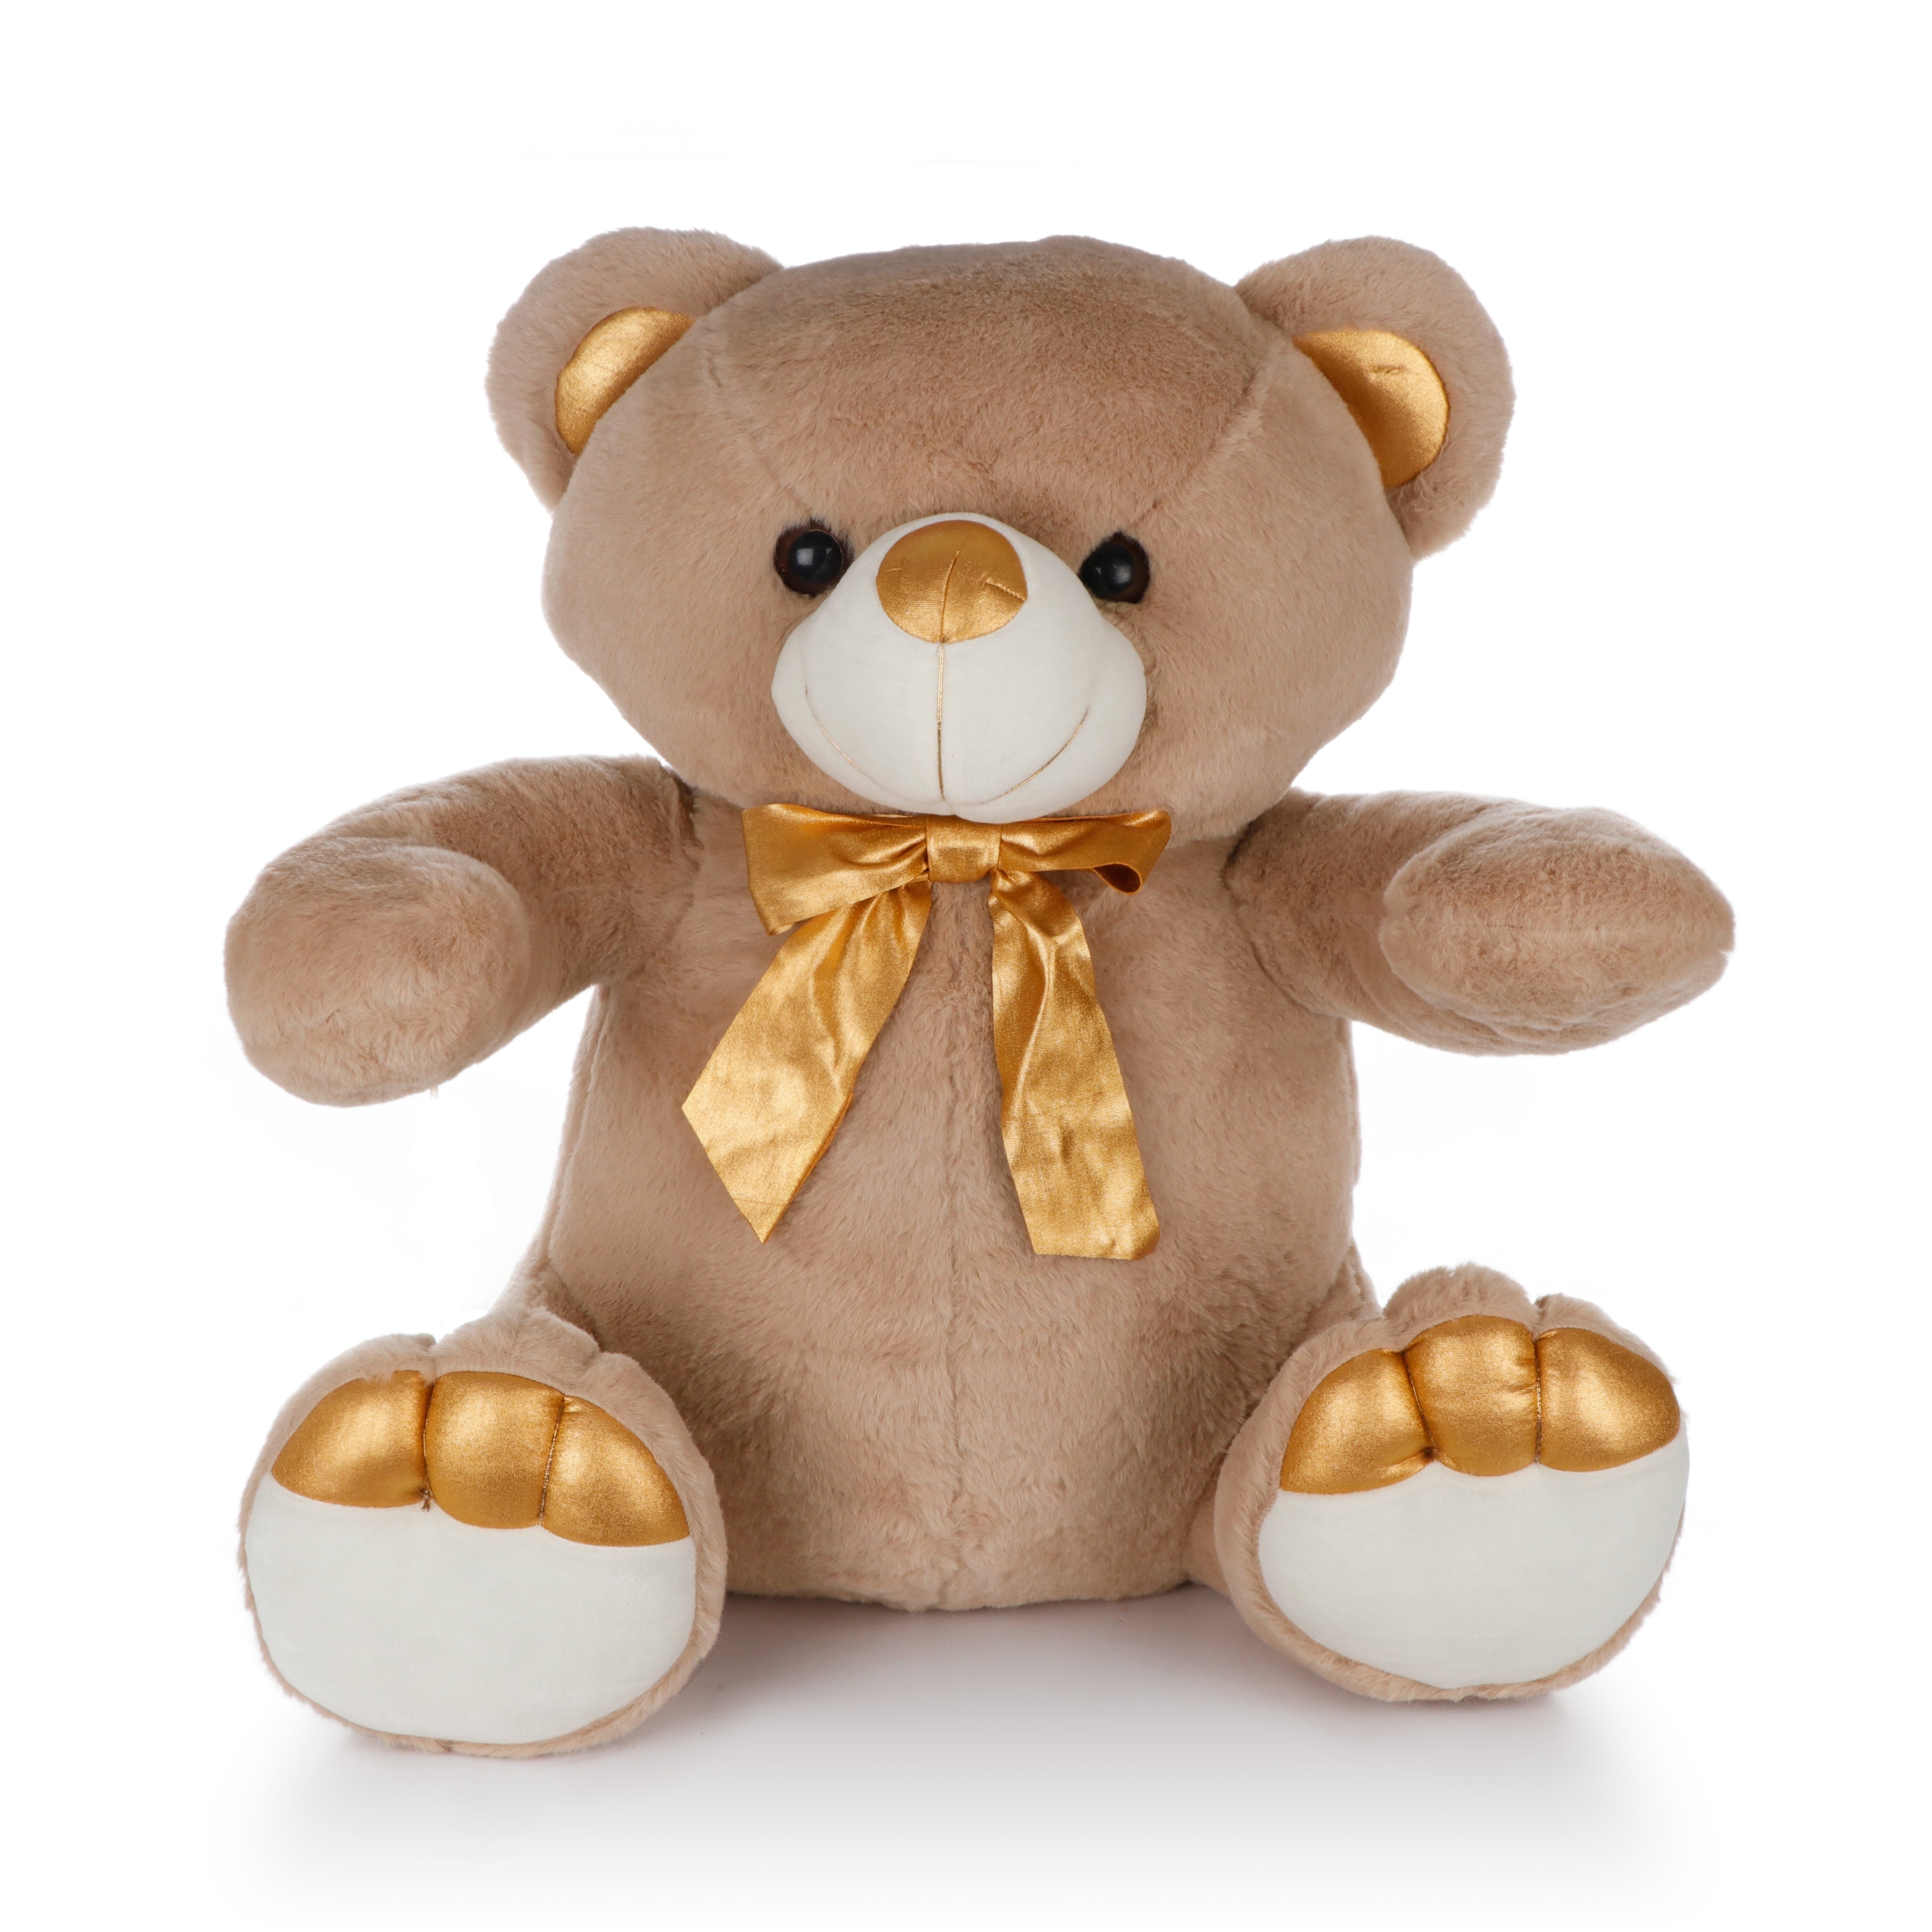 Archies | Archies Soft Toys, Teddy Bear For Girls, Soft Toys Boyfriend, Husband For Kids, Birthday Gift For Girls,Wife,   Brown Teddy Bear with Golden Paws - 55CM